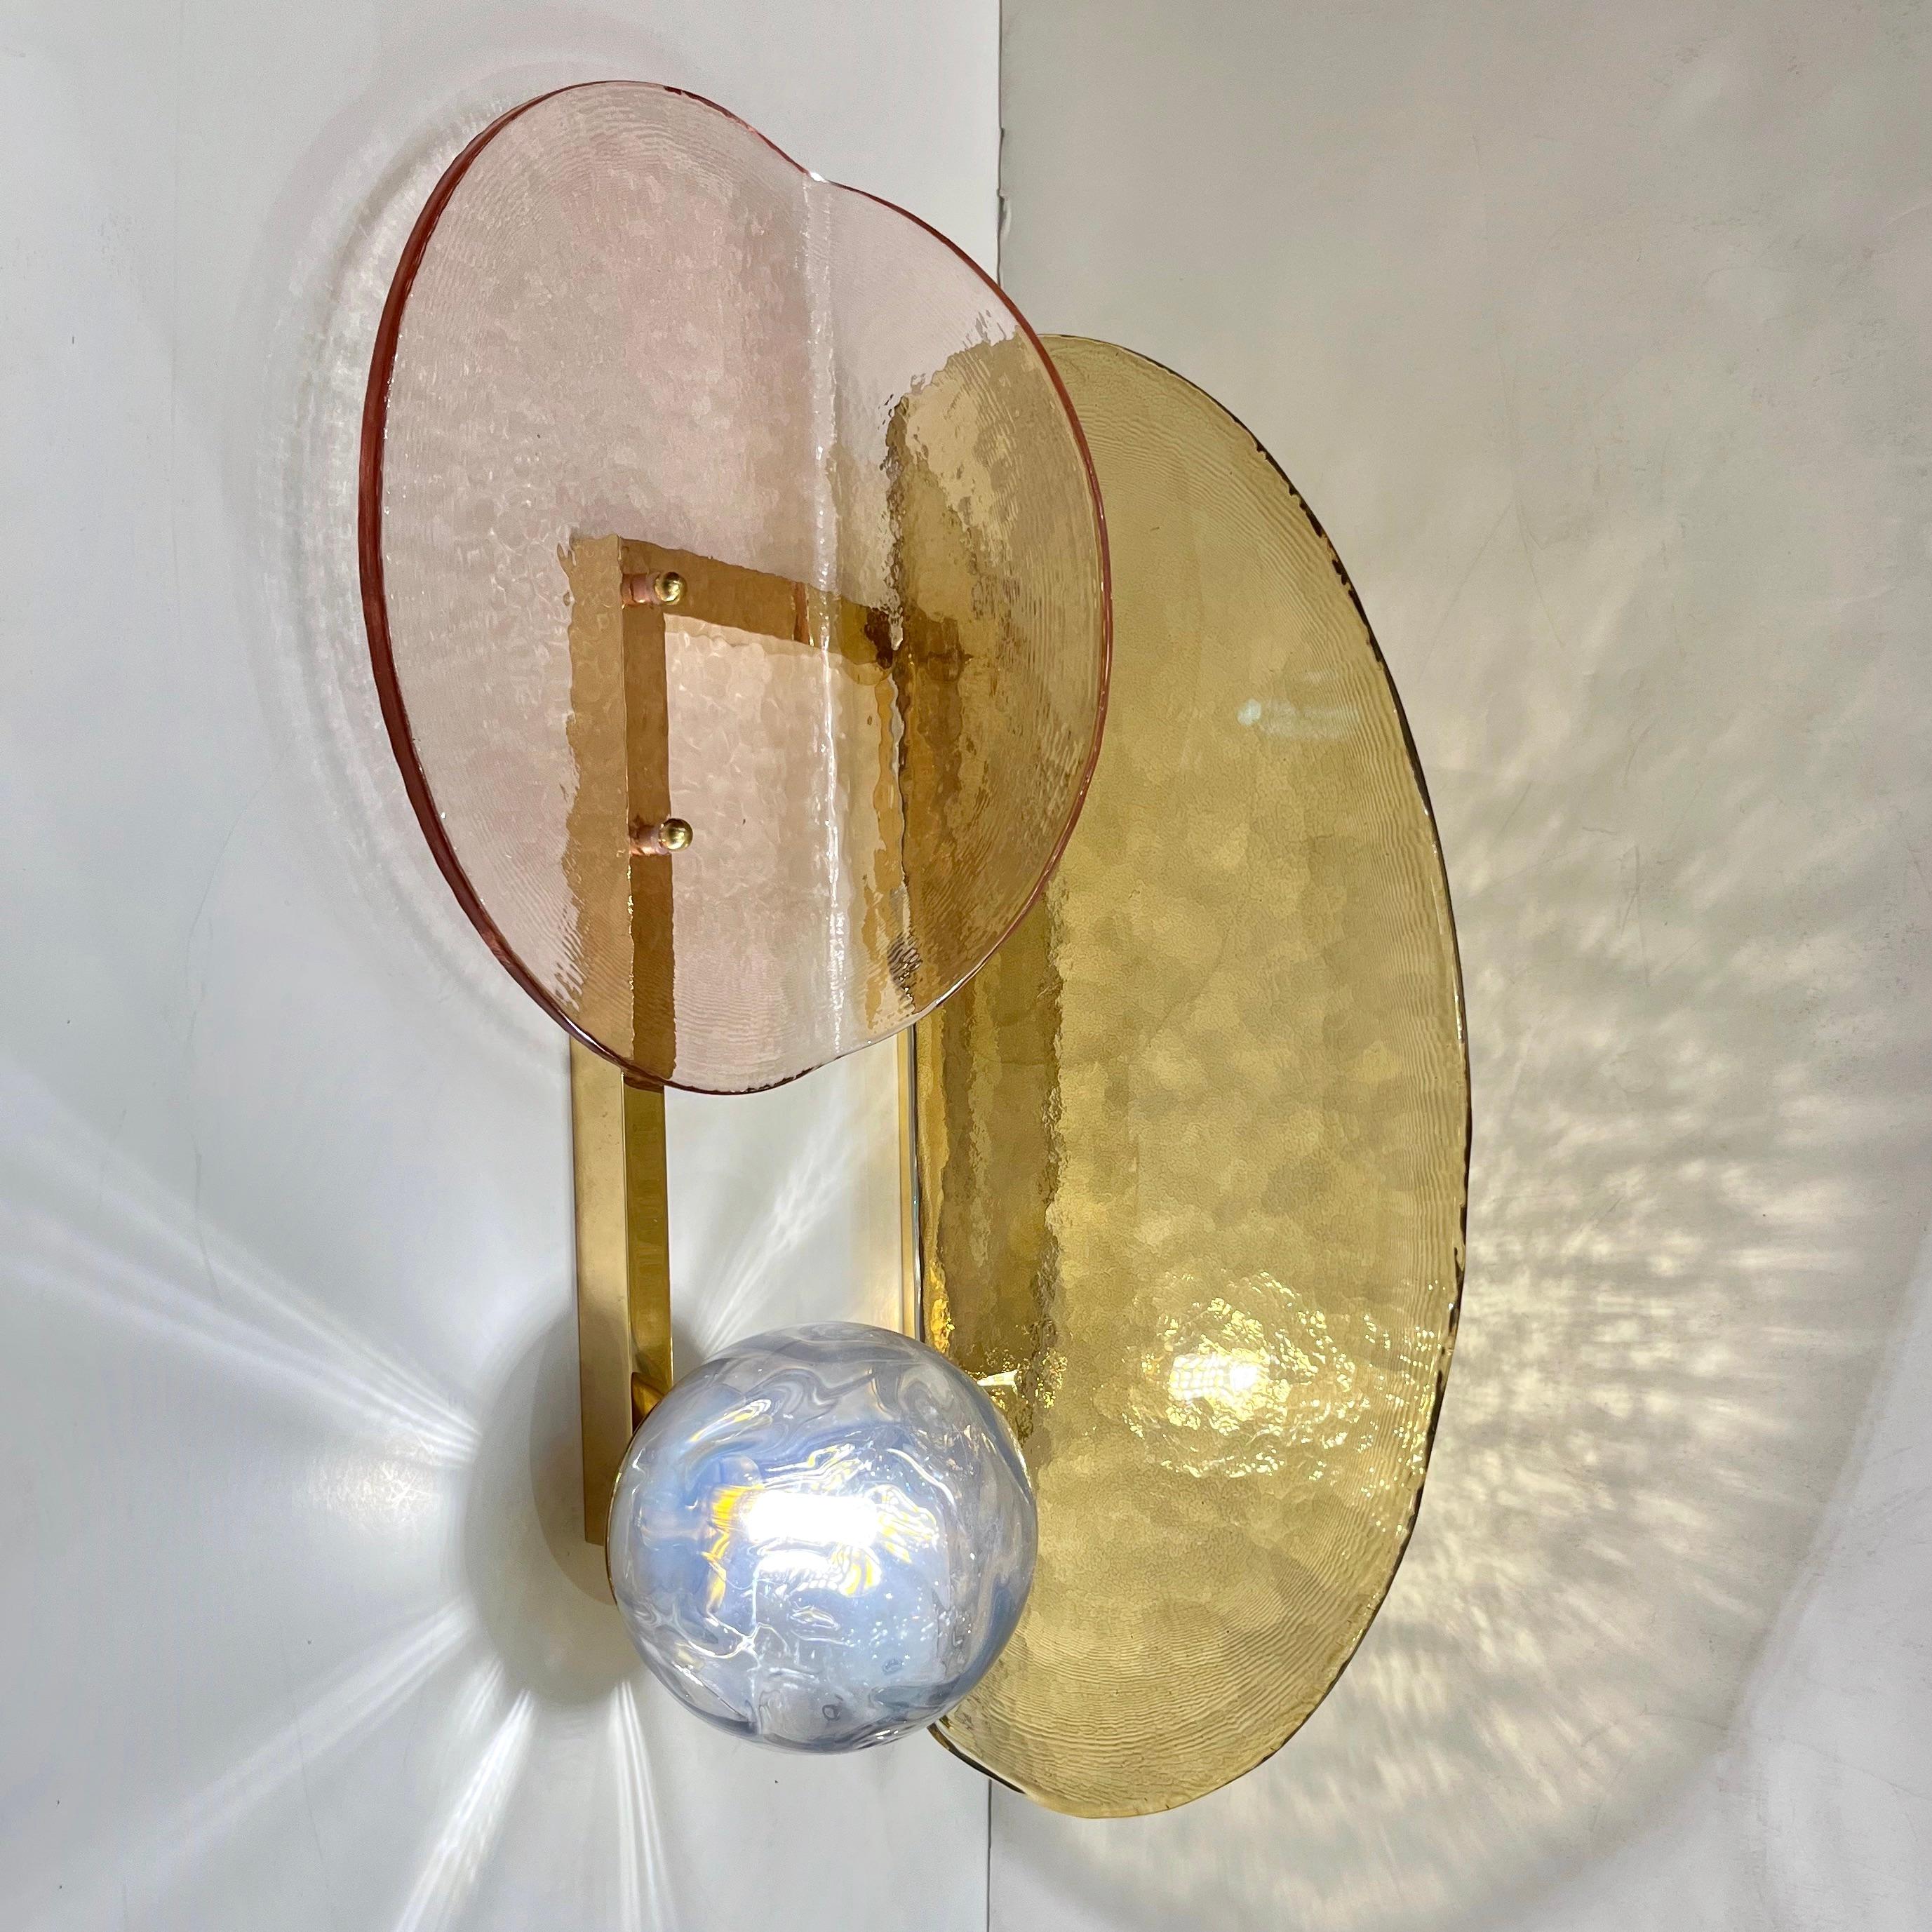 A contemporary creation with a unique modern geometric design, these wall lights are entirely handcrafted in Italy. The molded textured glass elements of organic curved shape, in amber gold and light pink, daisy rose Murano glass, are mounted in a